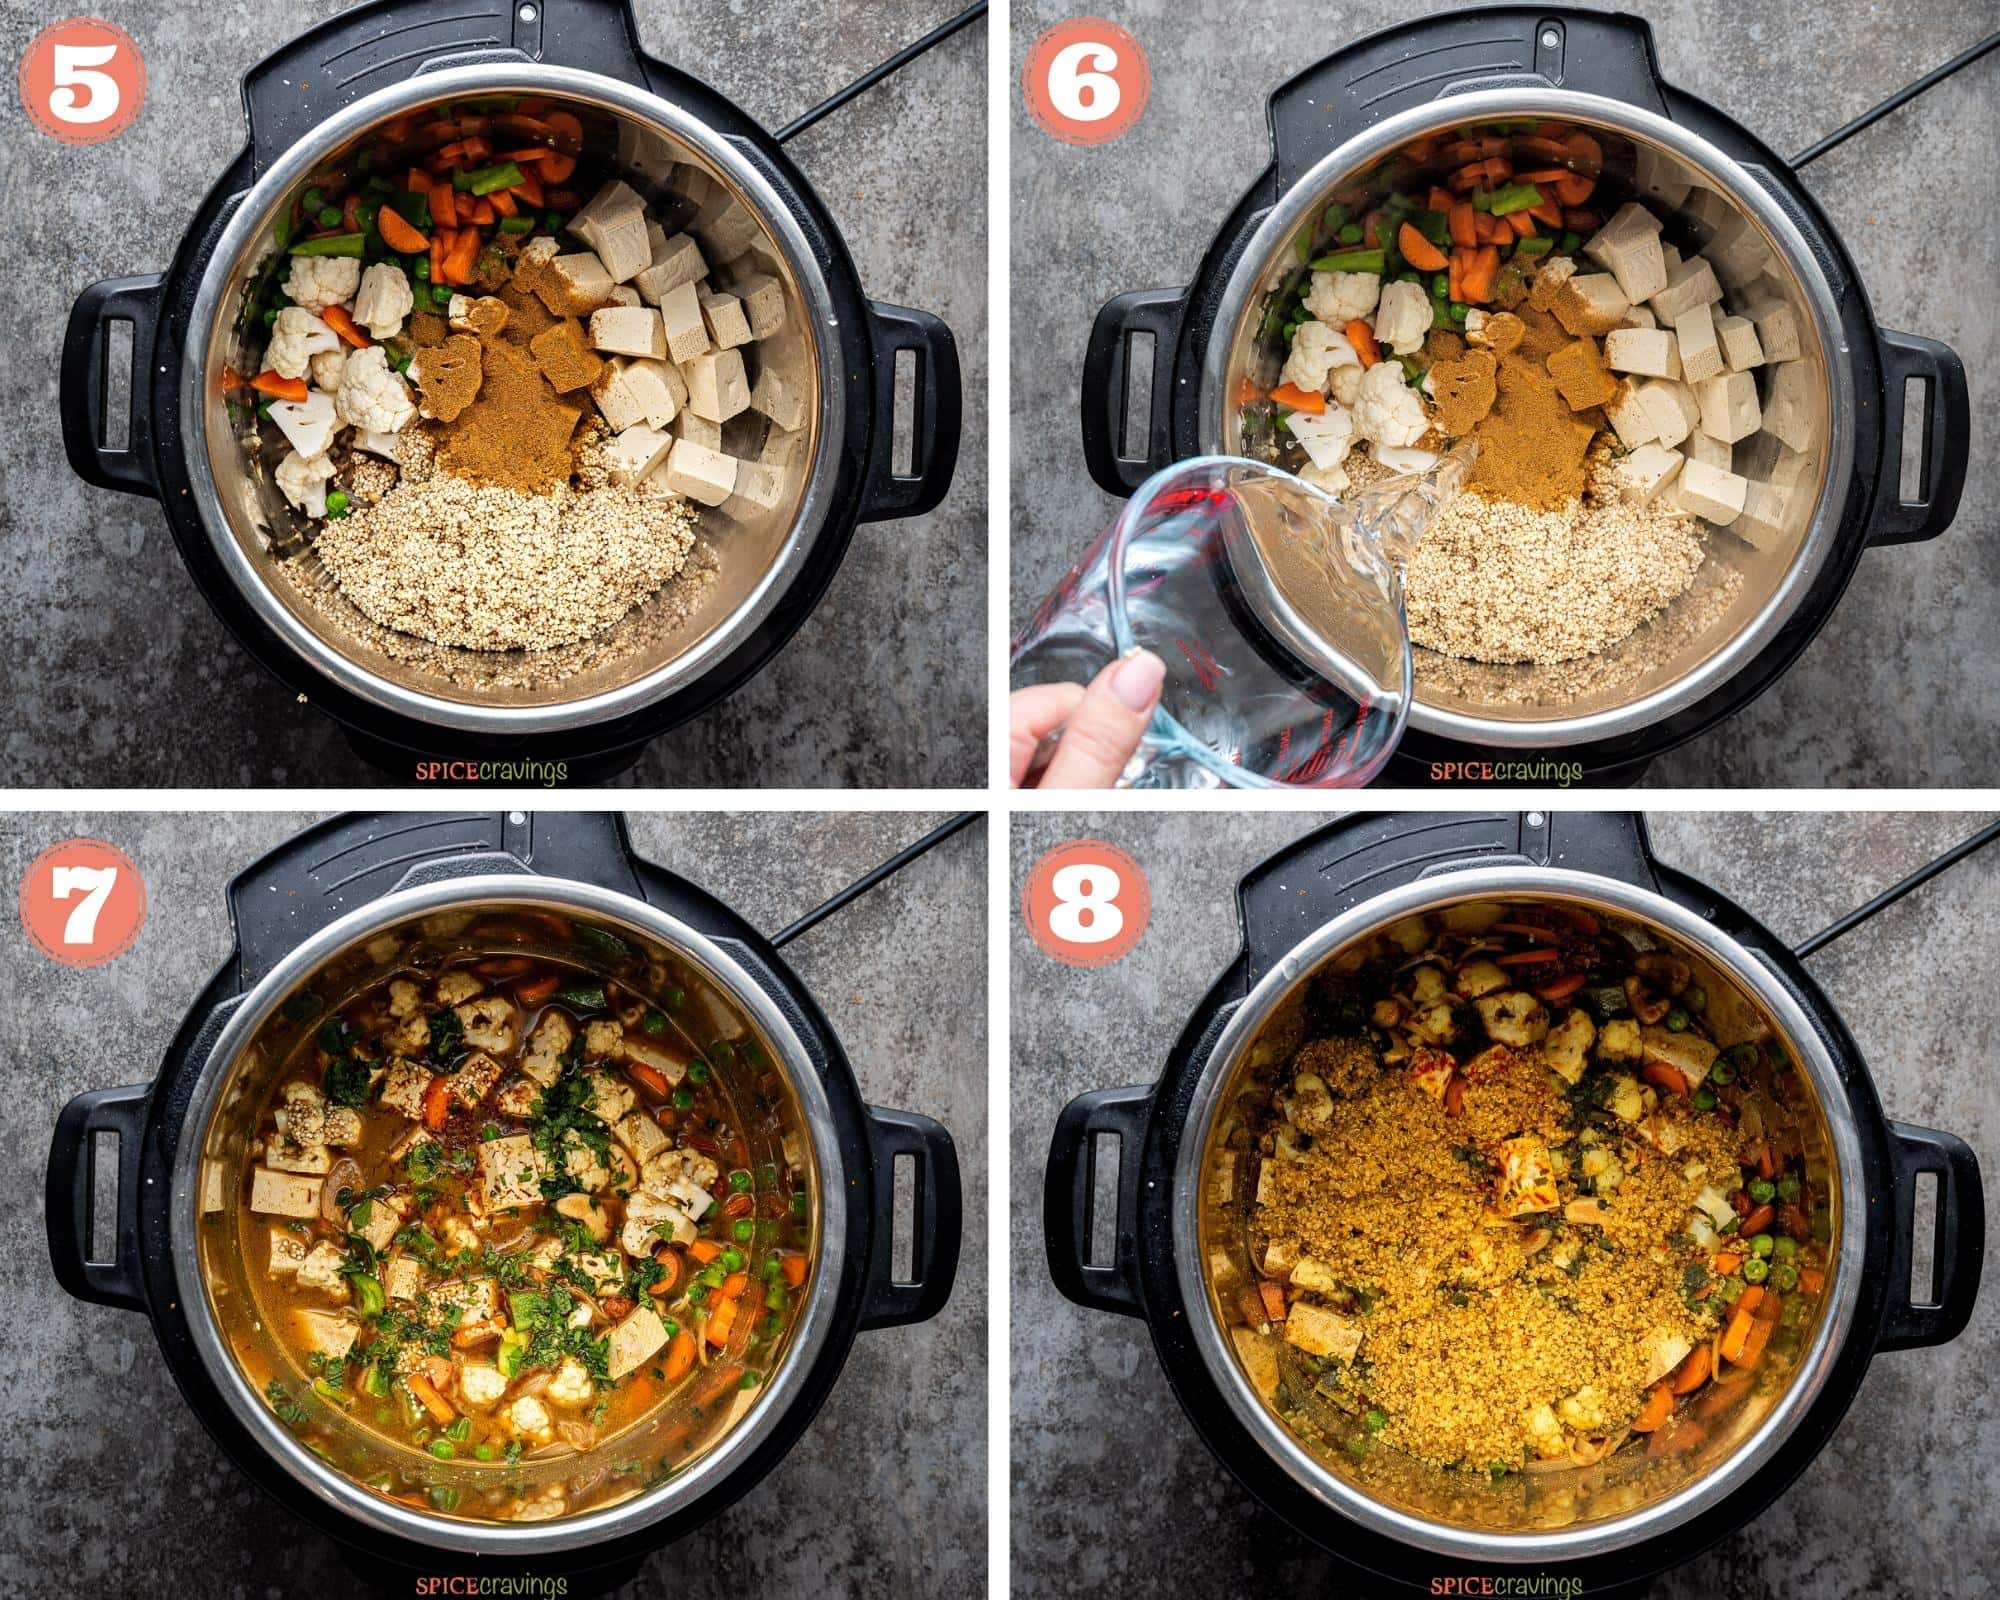 Steps 5 to 8 showing how to make quinoa biryani in instant pot